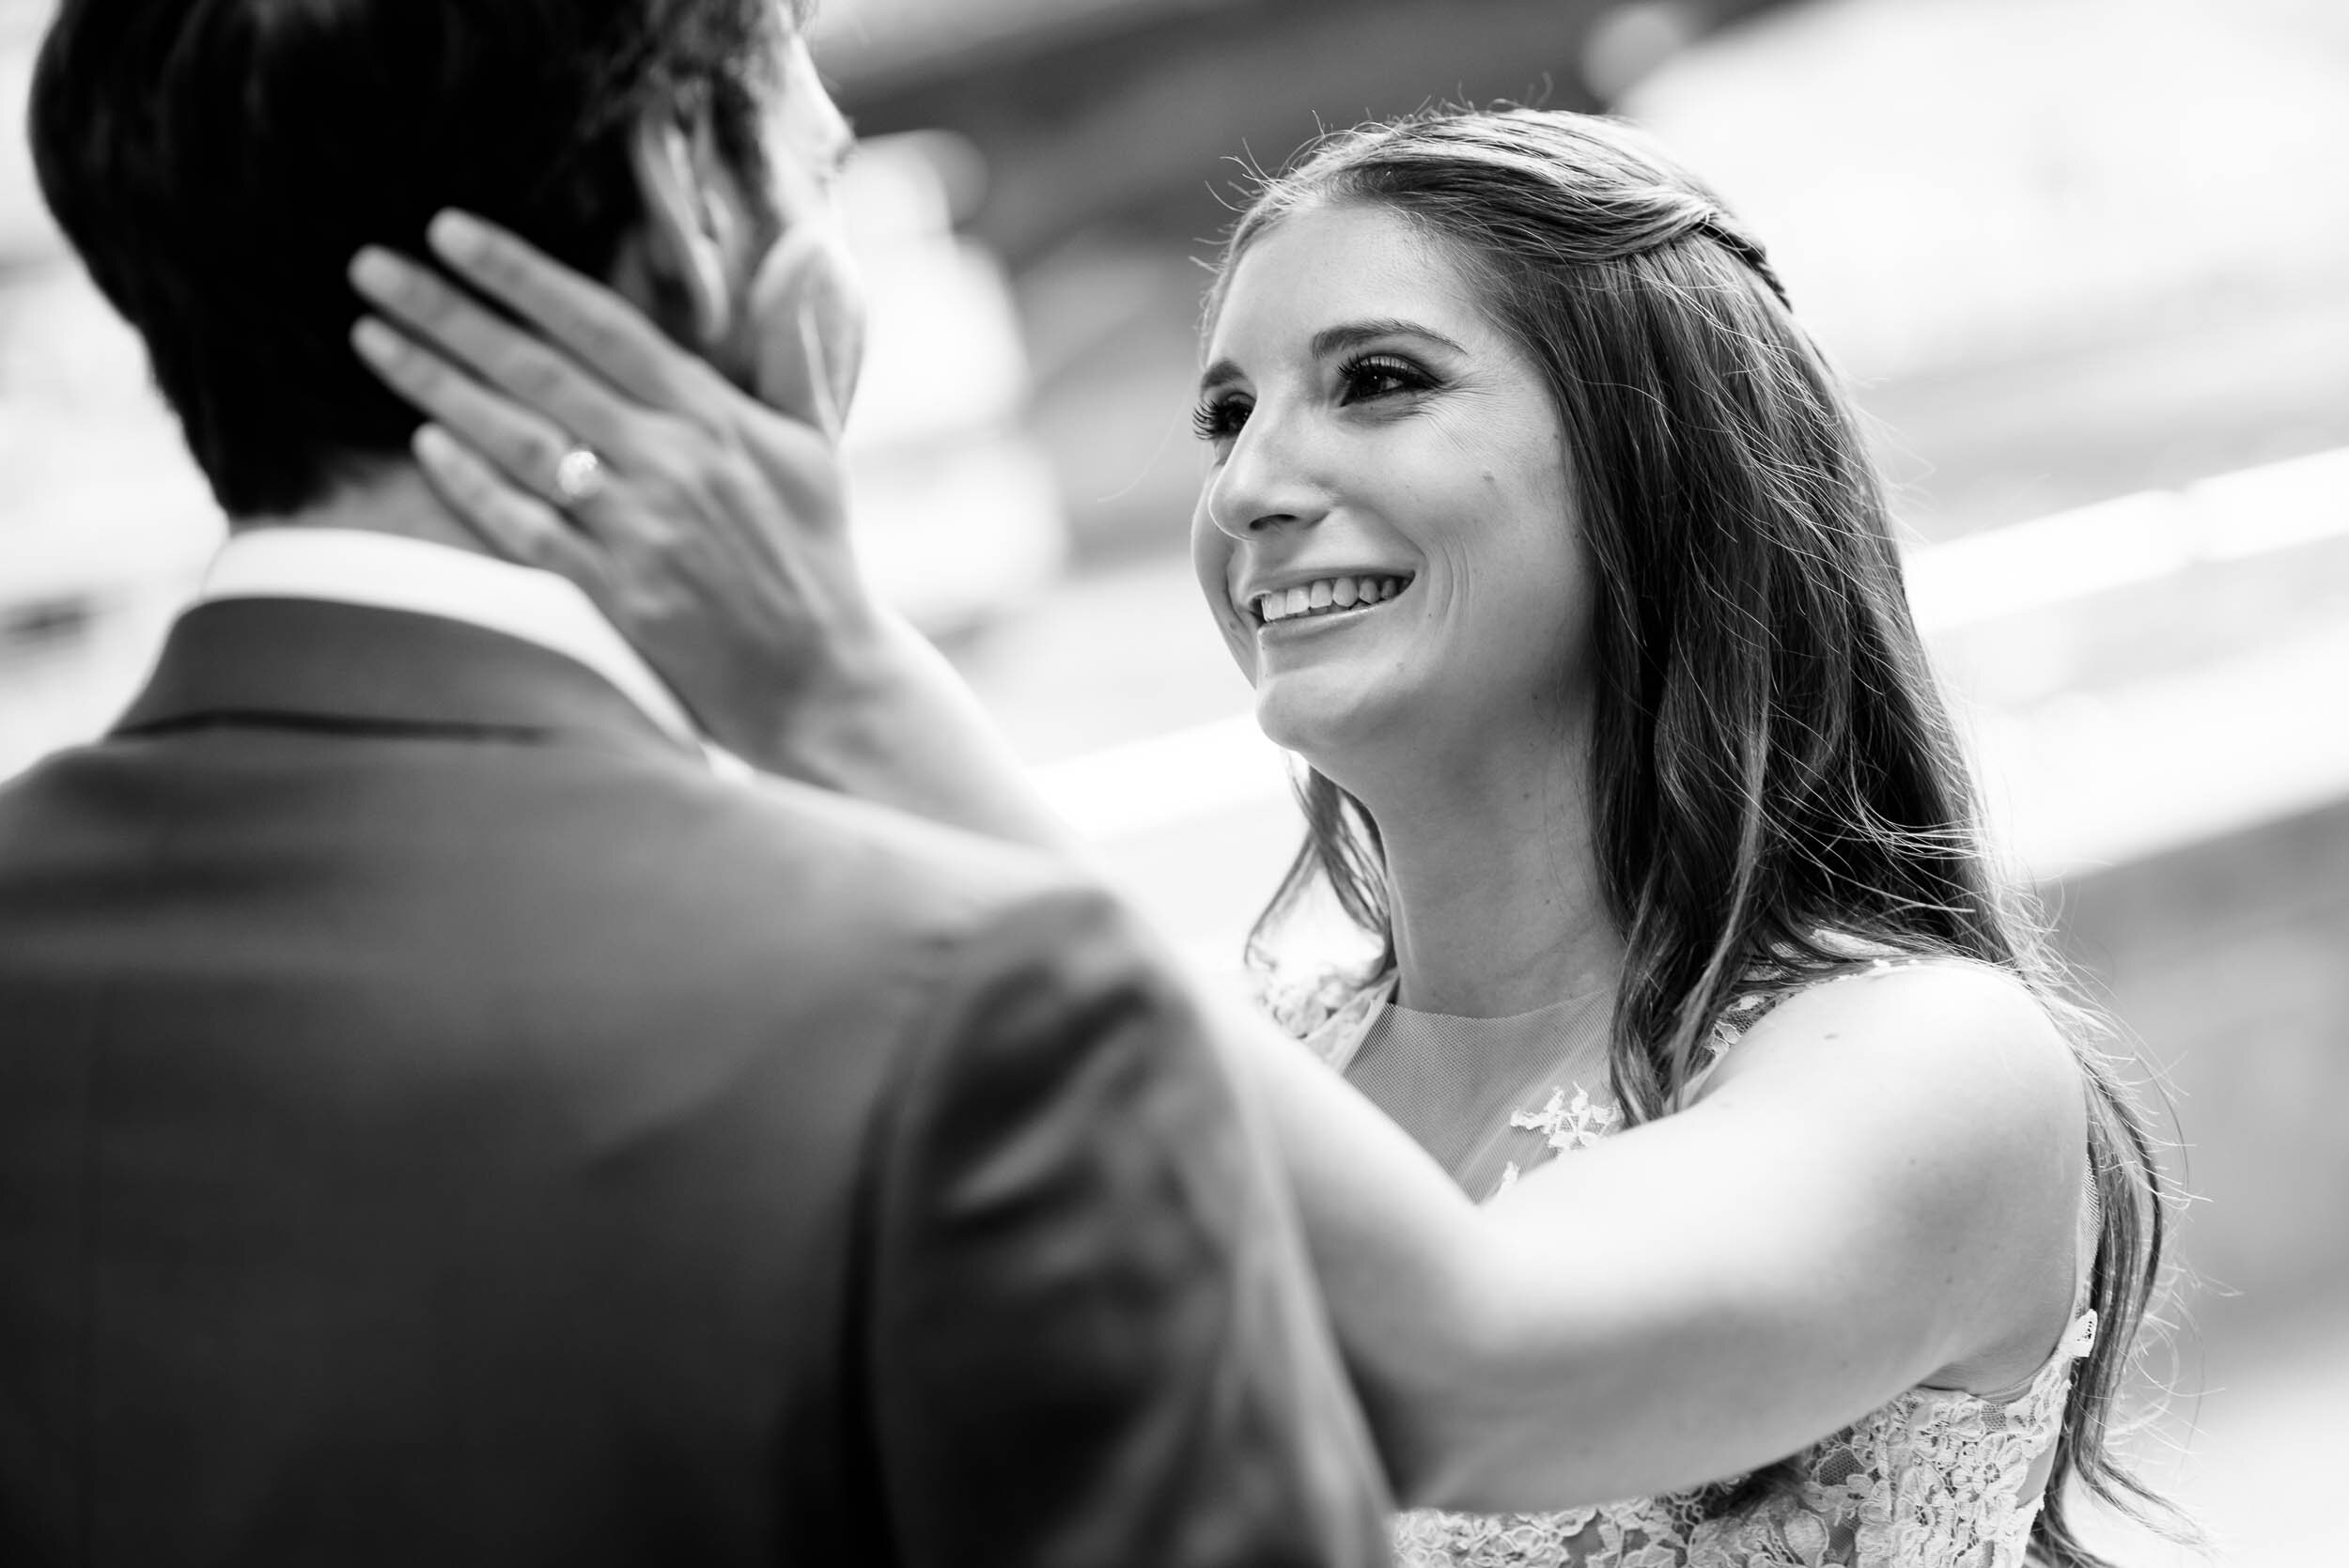 Bride and groom first look: Ravenswood Event Center Chicago wedding captured by J. Brown Photography.  